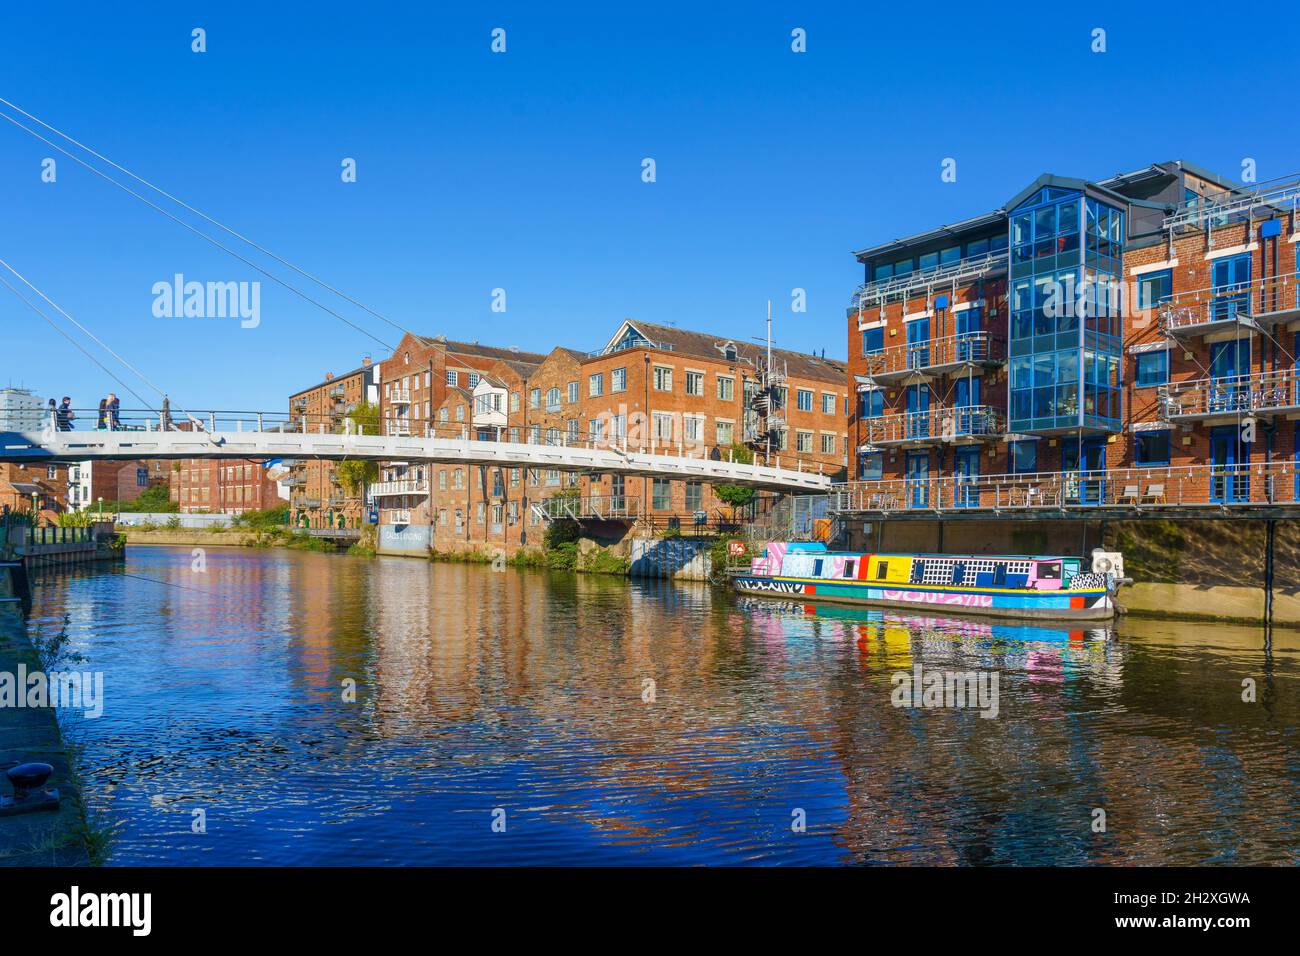 Cable-stayed pedestrianised bridge (footbridge) spanning The River Aire with a colourful fixed barge, Leeds, West Yorkshire, England, UK. Stock Photo